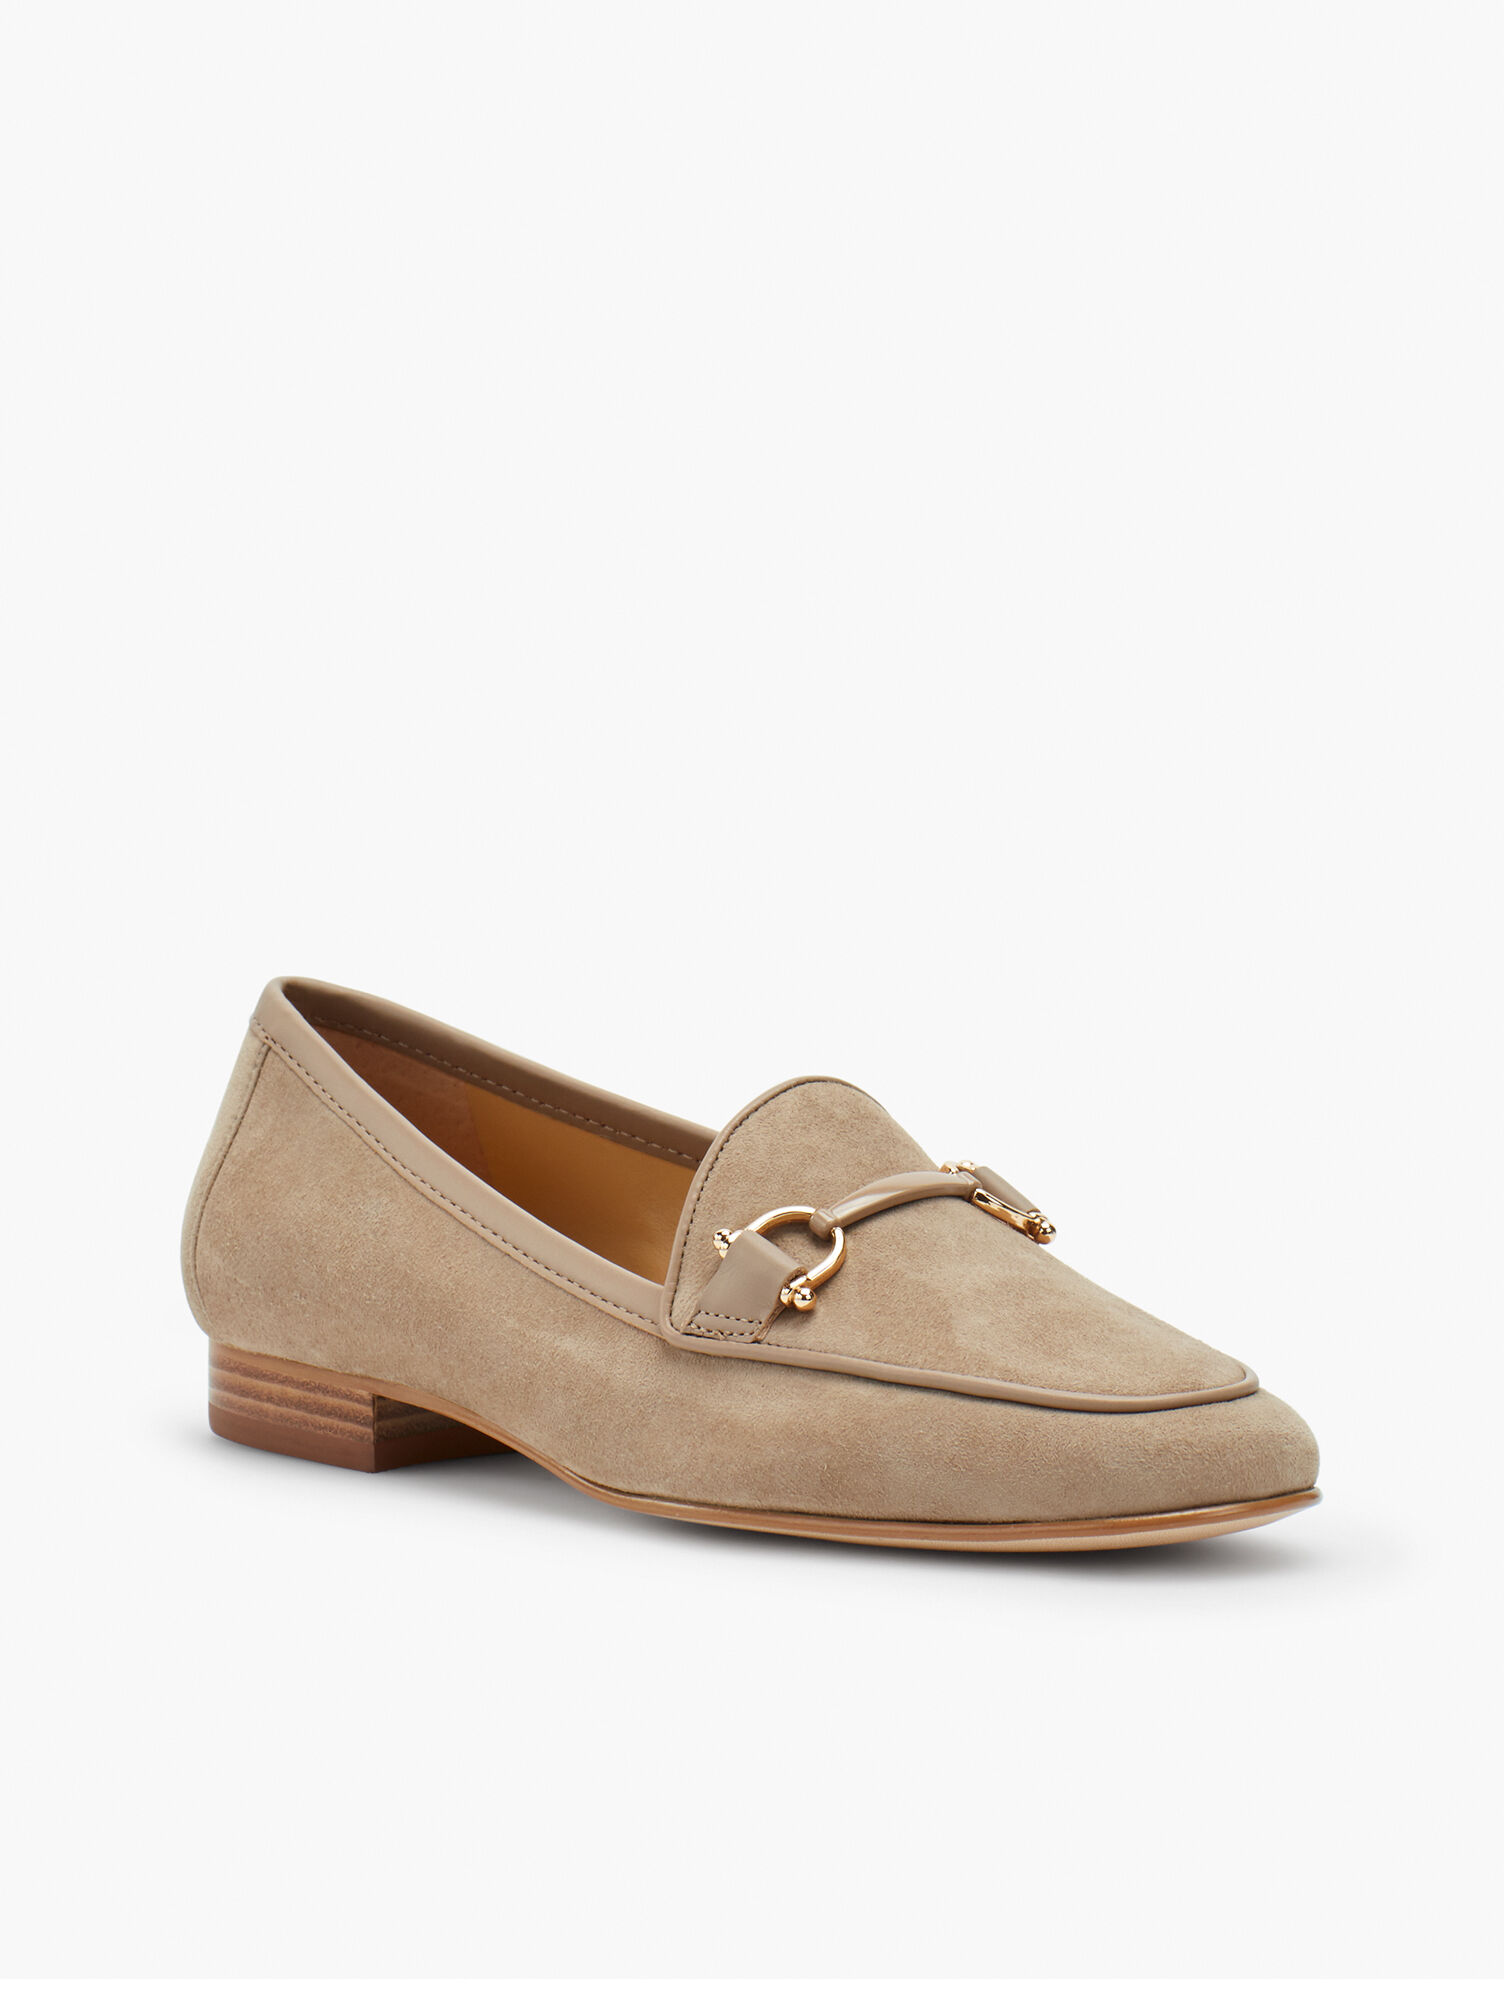 Cassidy Kid Suede Loafers | Talbots